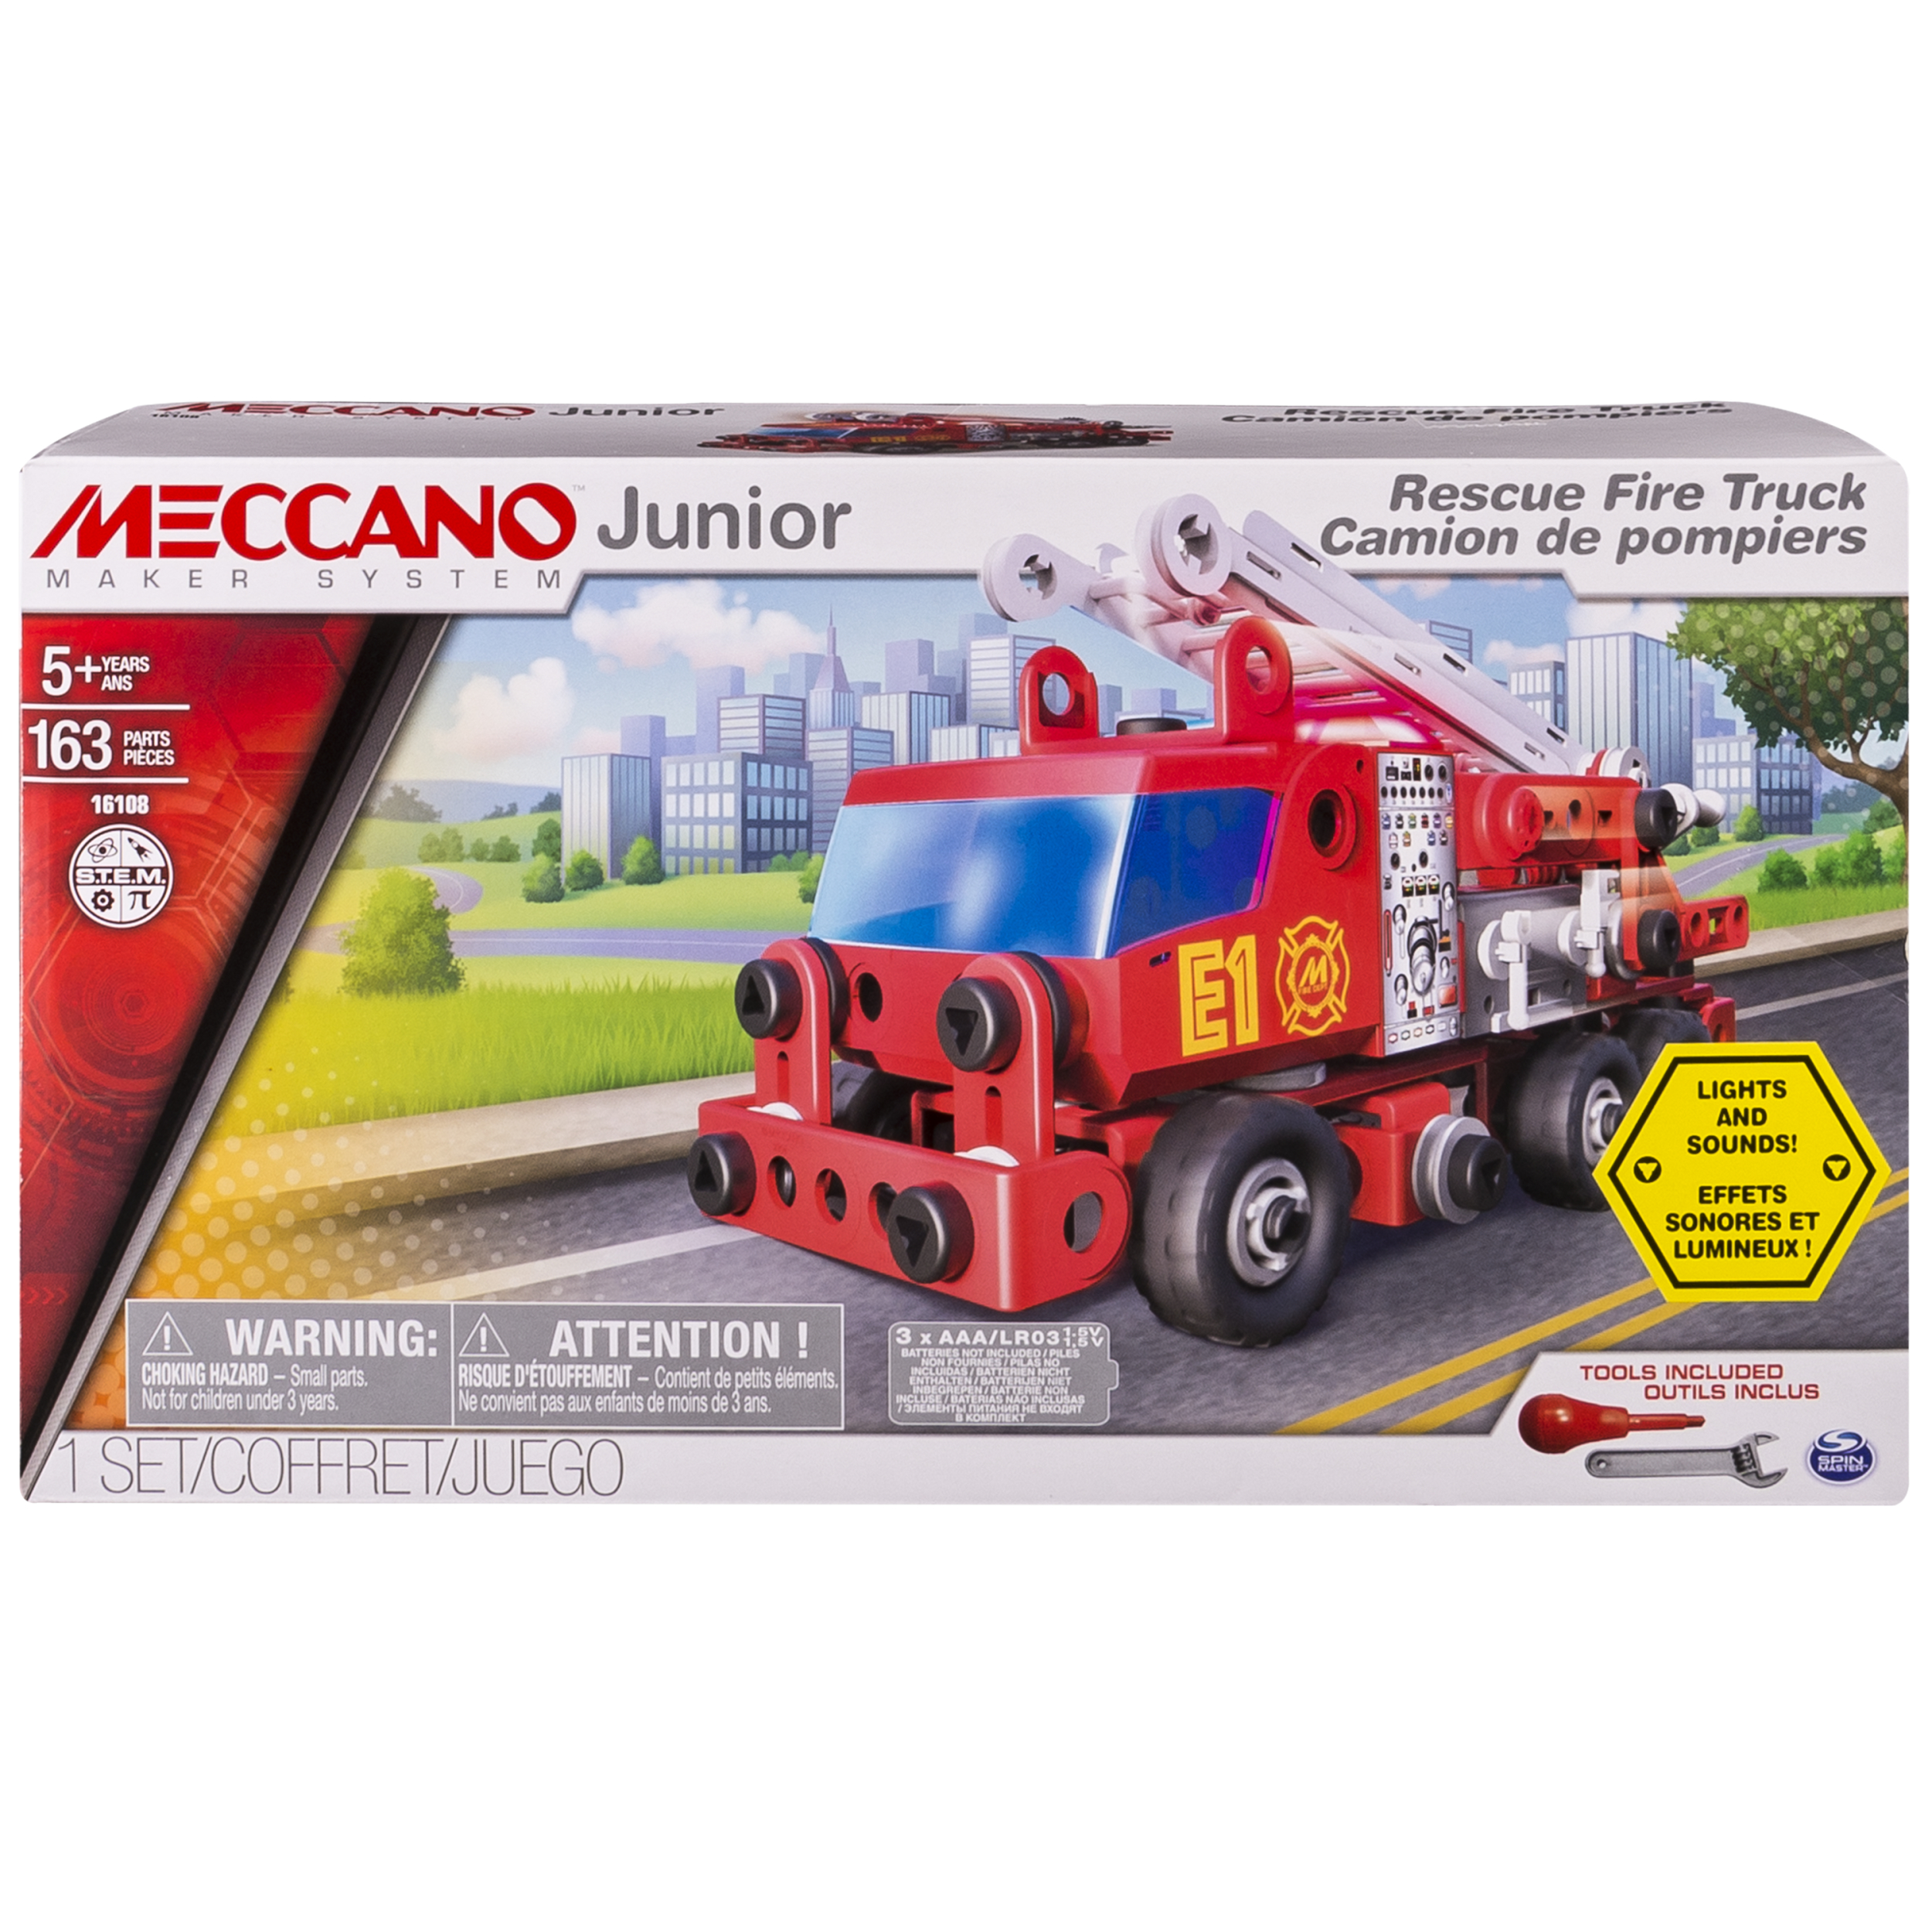 Meccano Junior Rescue Fire Truck with Lights and Sounds Model Building Kit - image 1 of 8